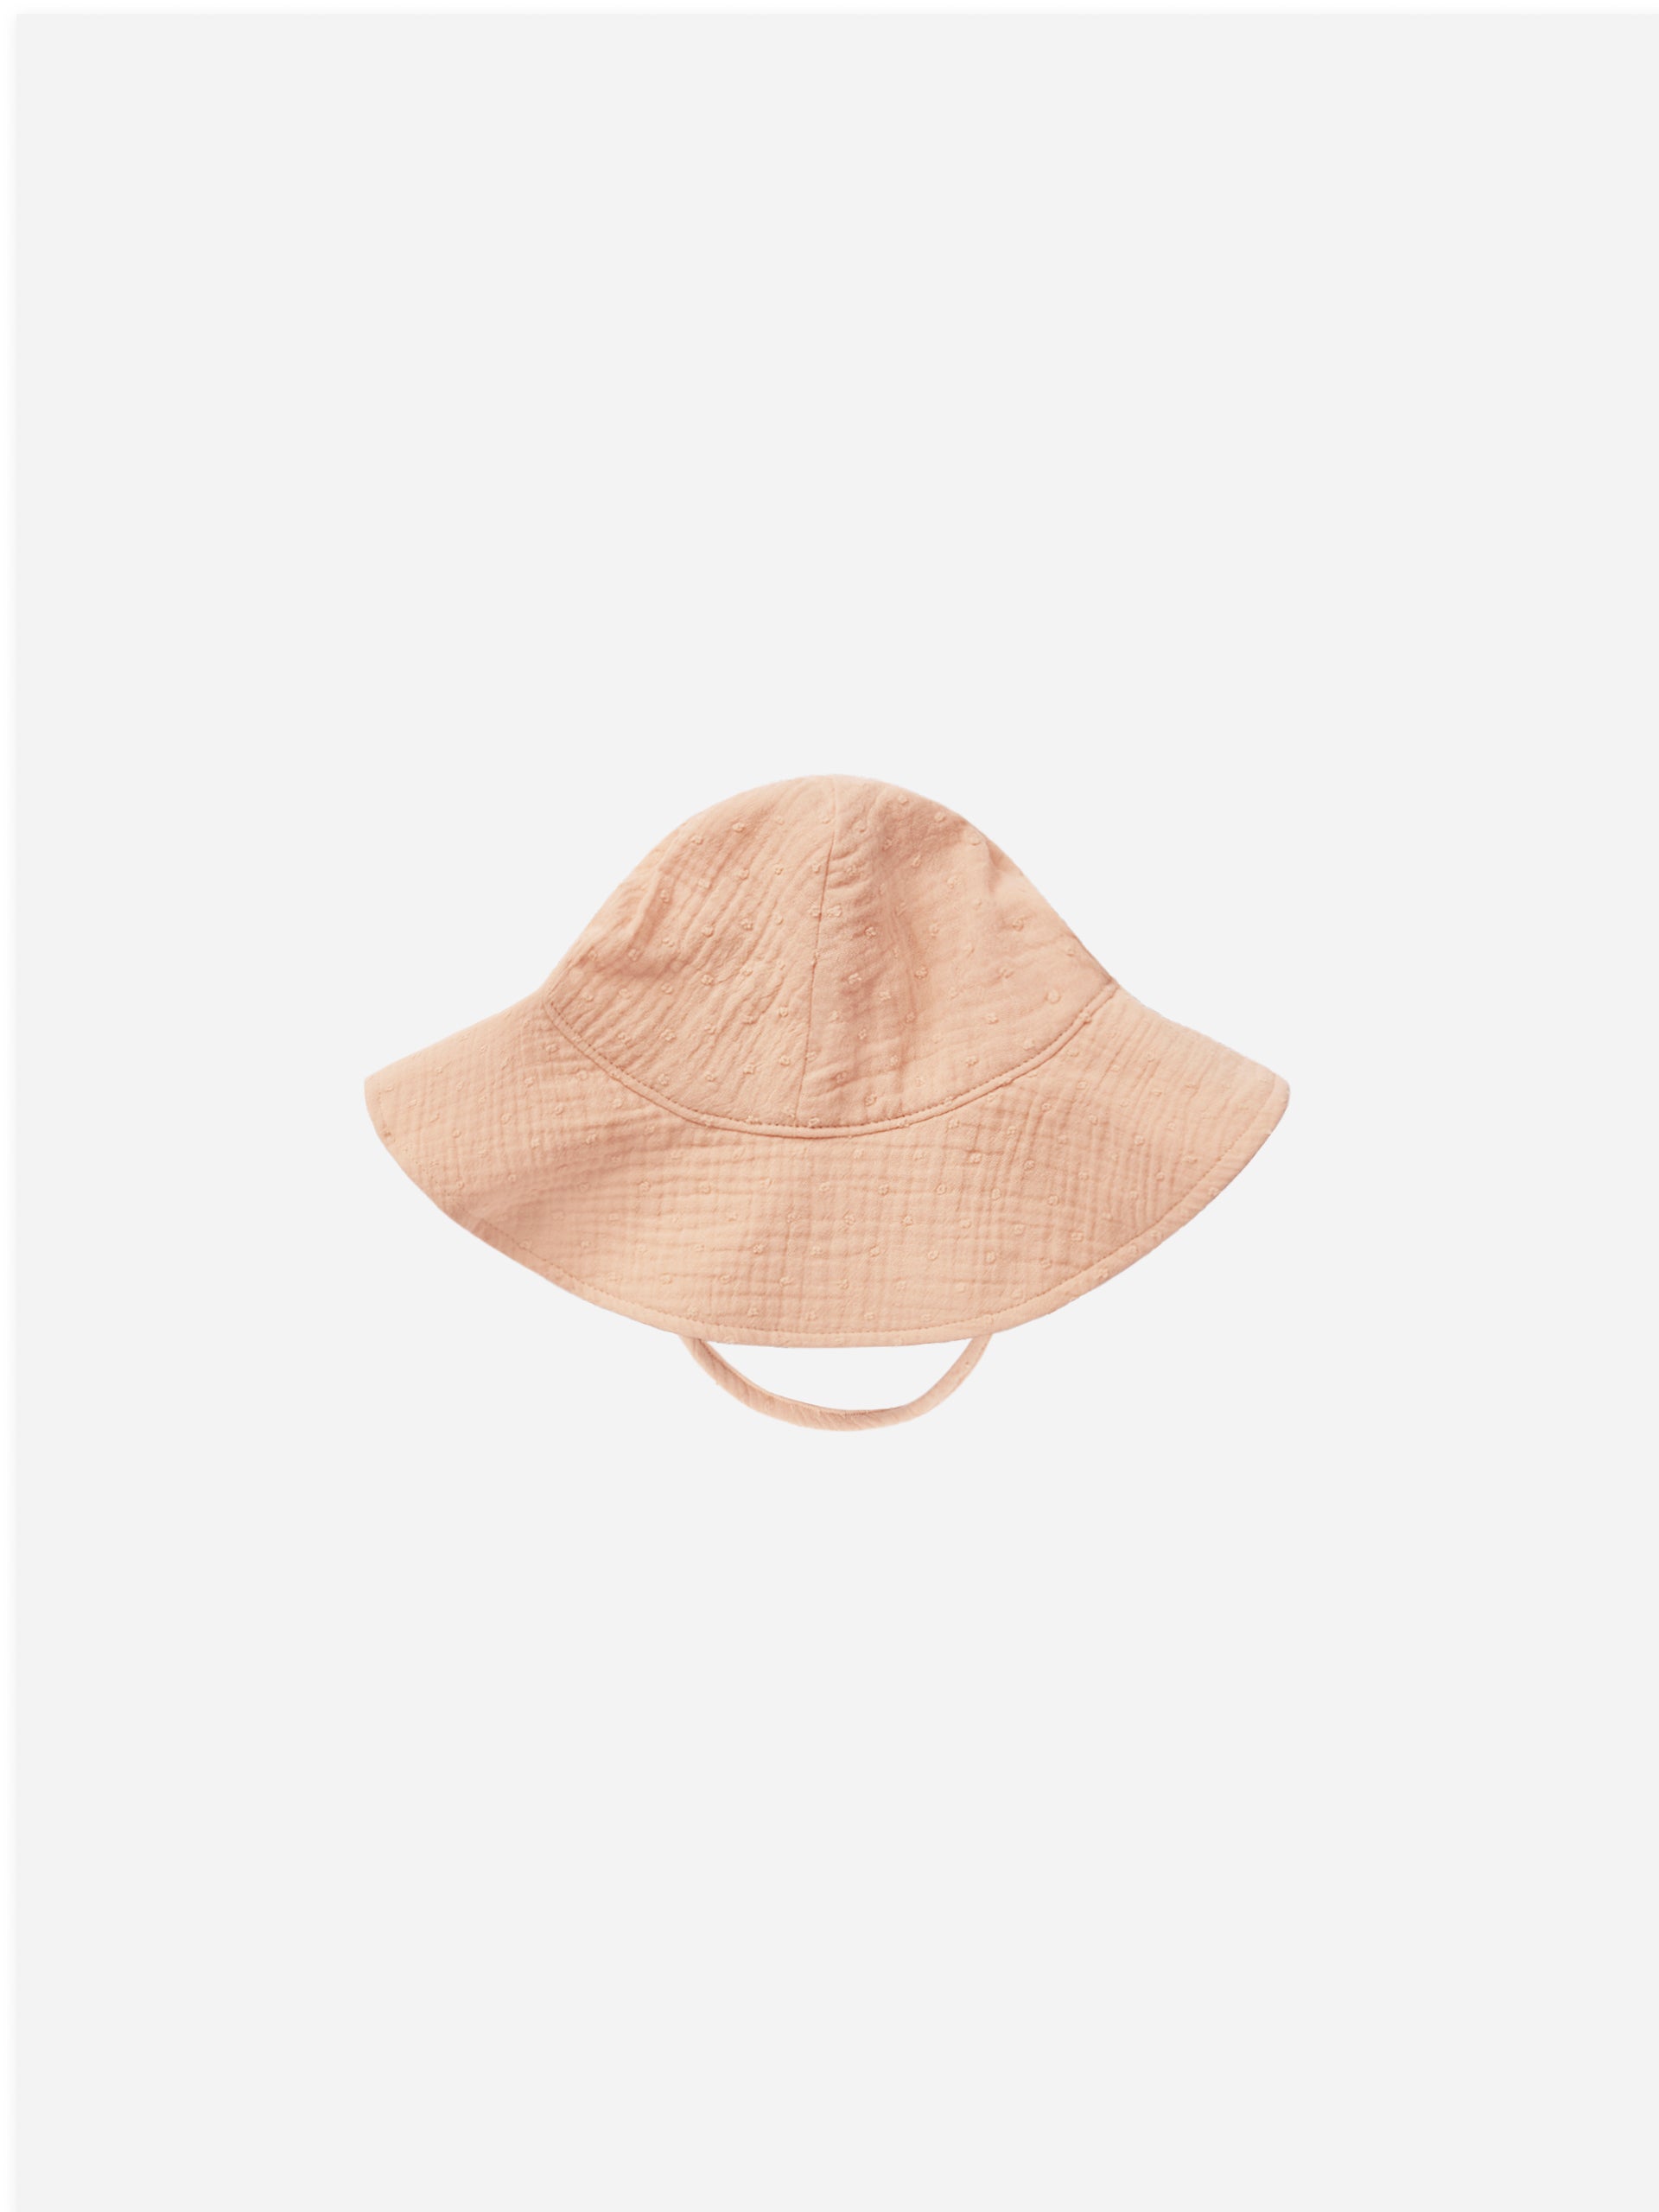 Floppy Sun Hat || Apricot - Rylee + Cru | Kids Clothes | Trendy Baby Clothes | Modern Infant Outfits |